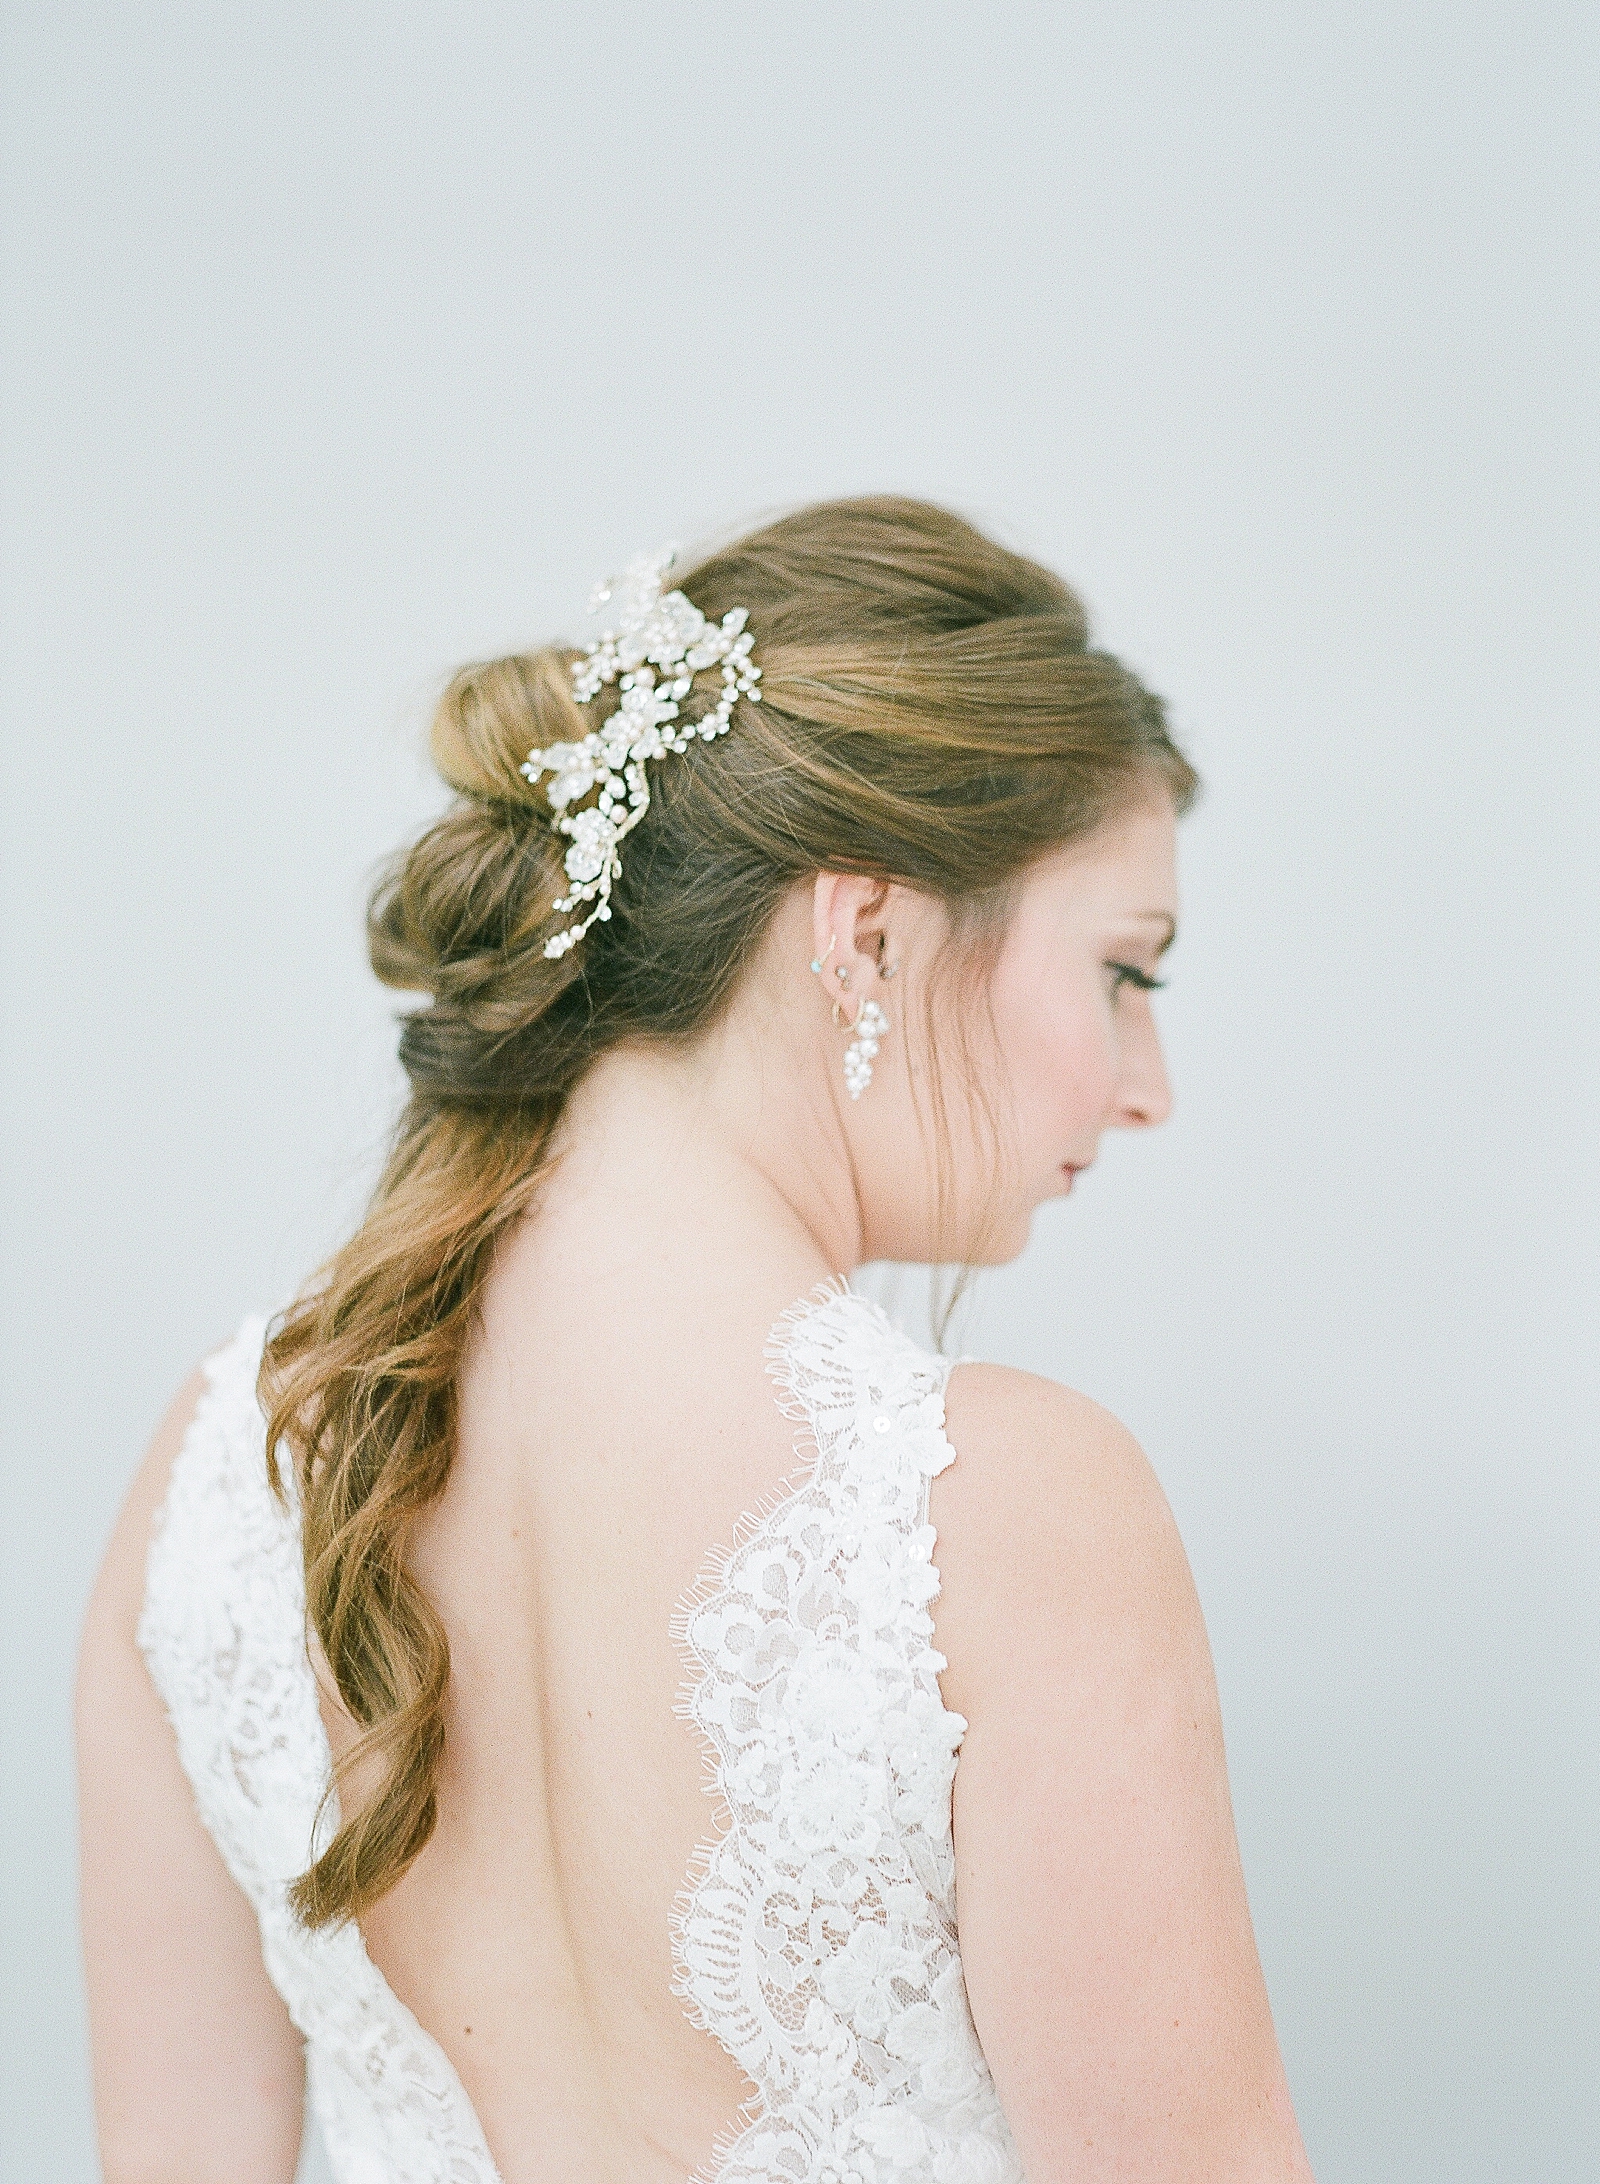 Asheville Bridal Editorial Detail of Bride's Hairstyle Photo